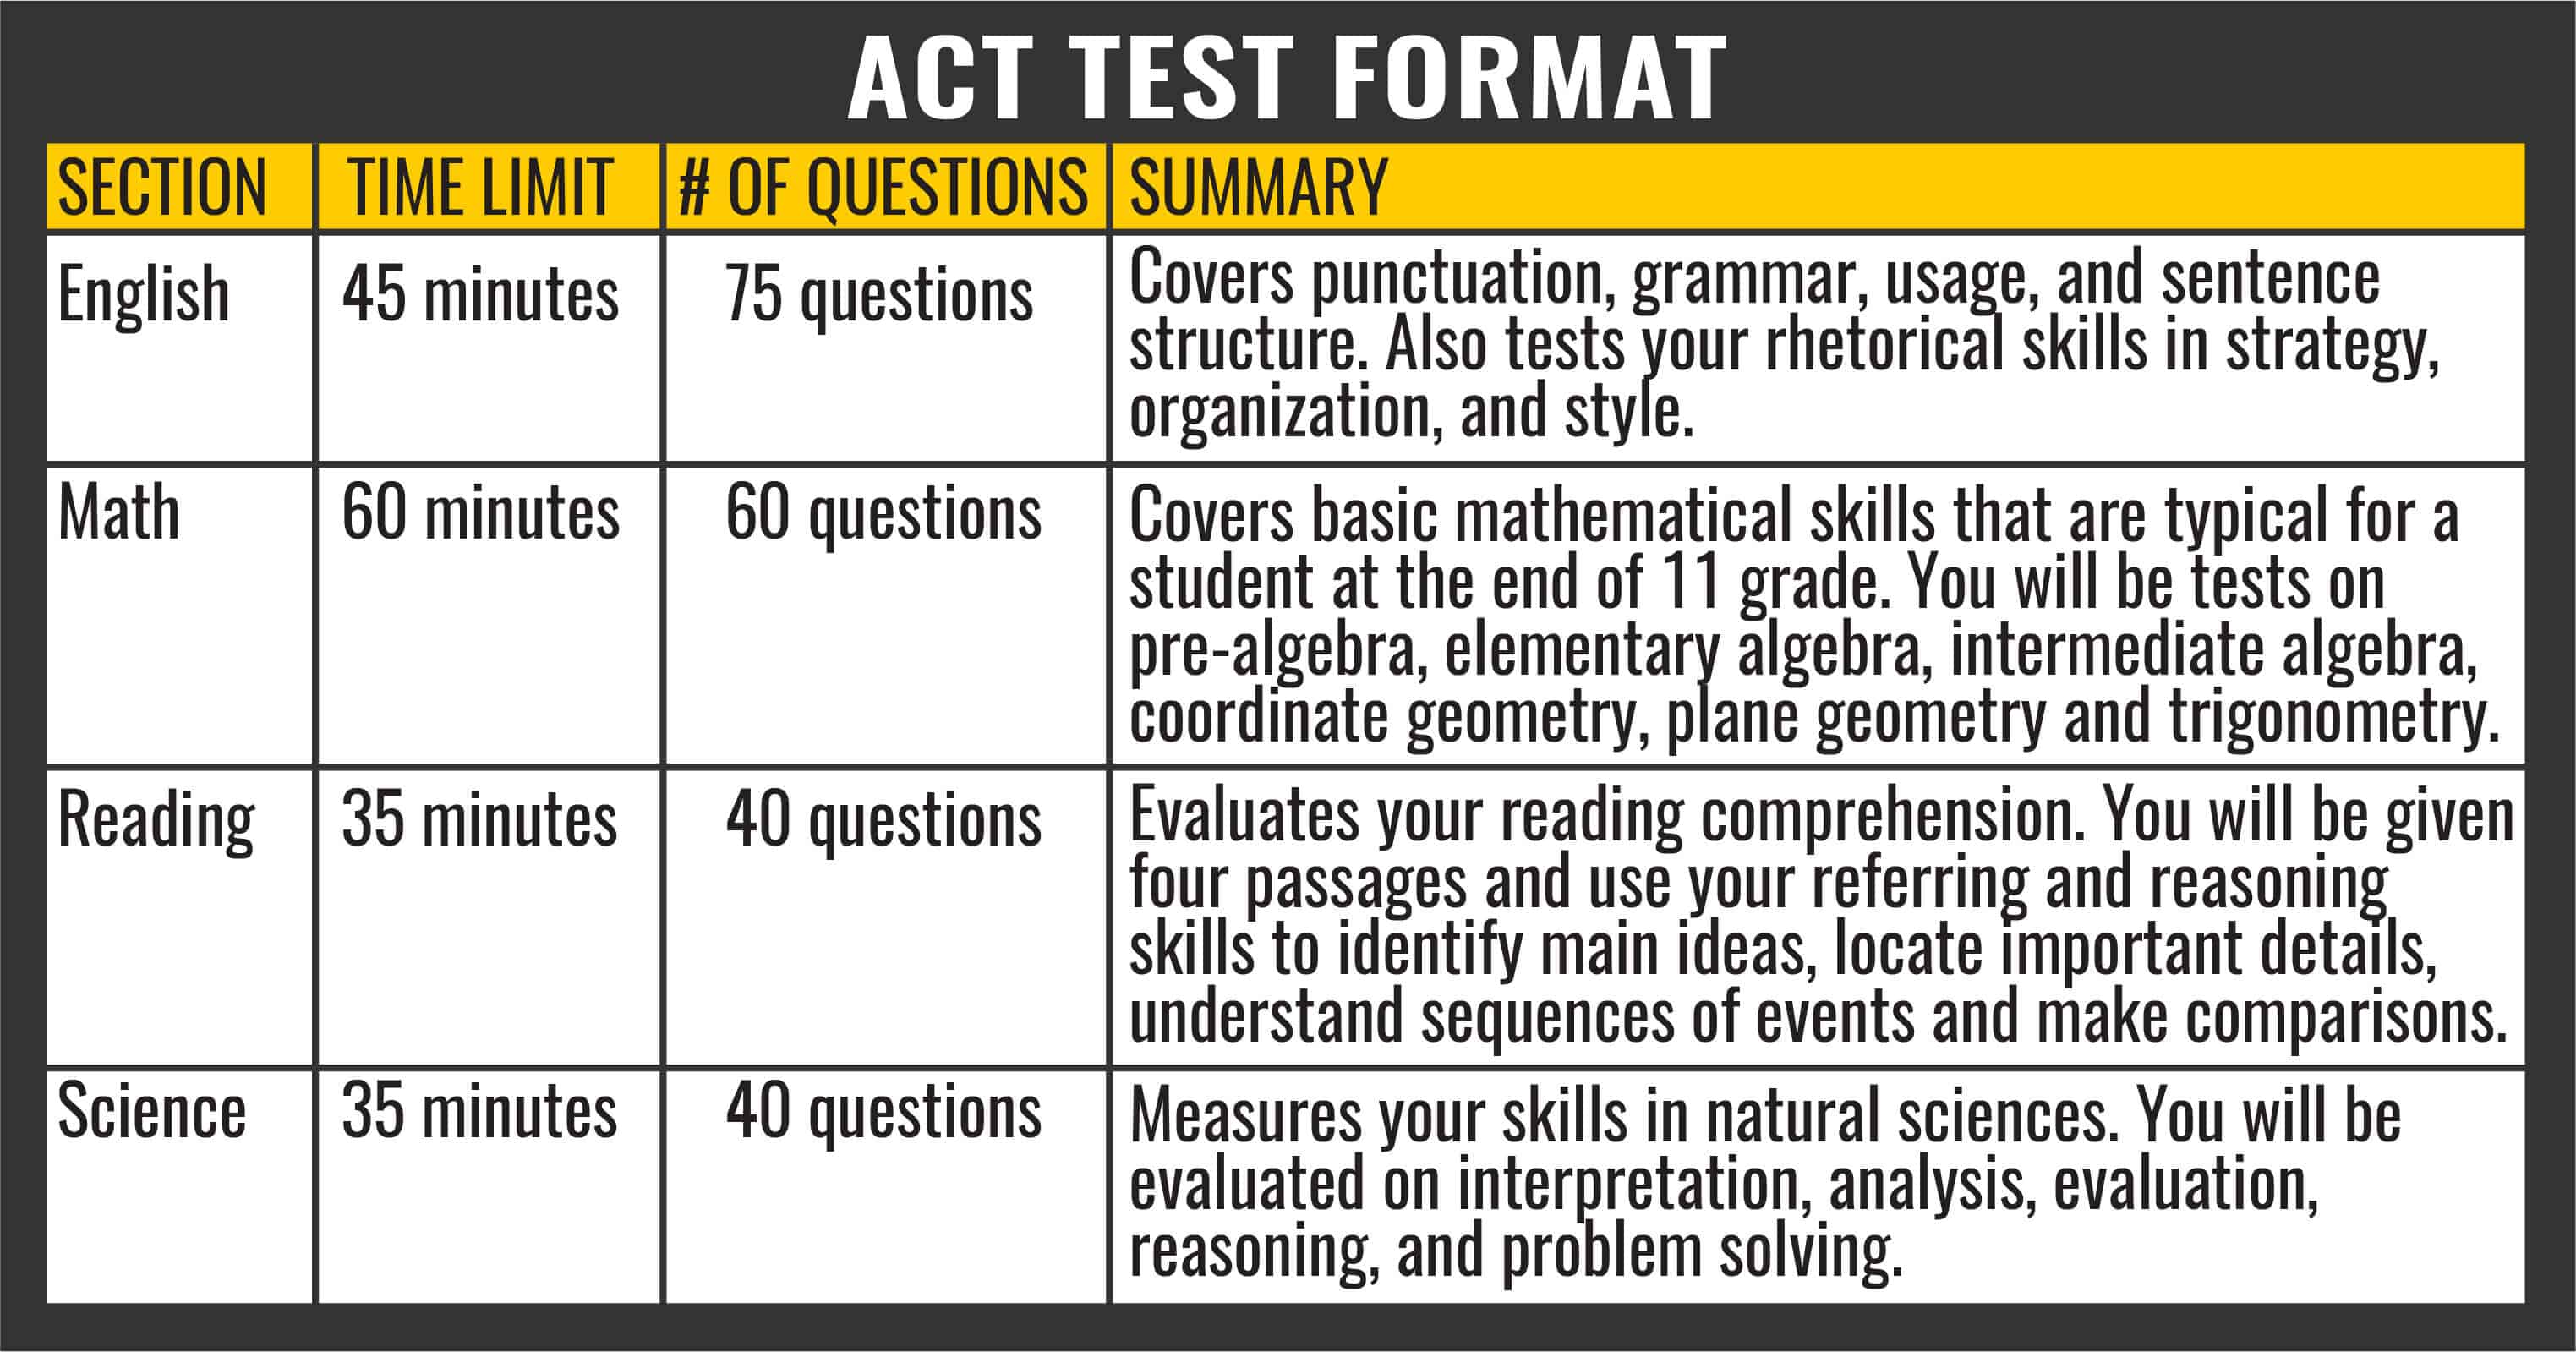 ACT Test Format